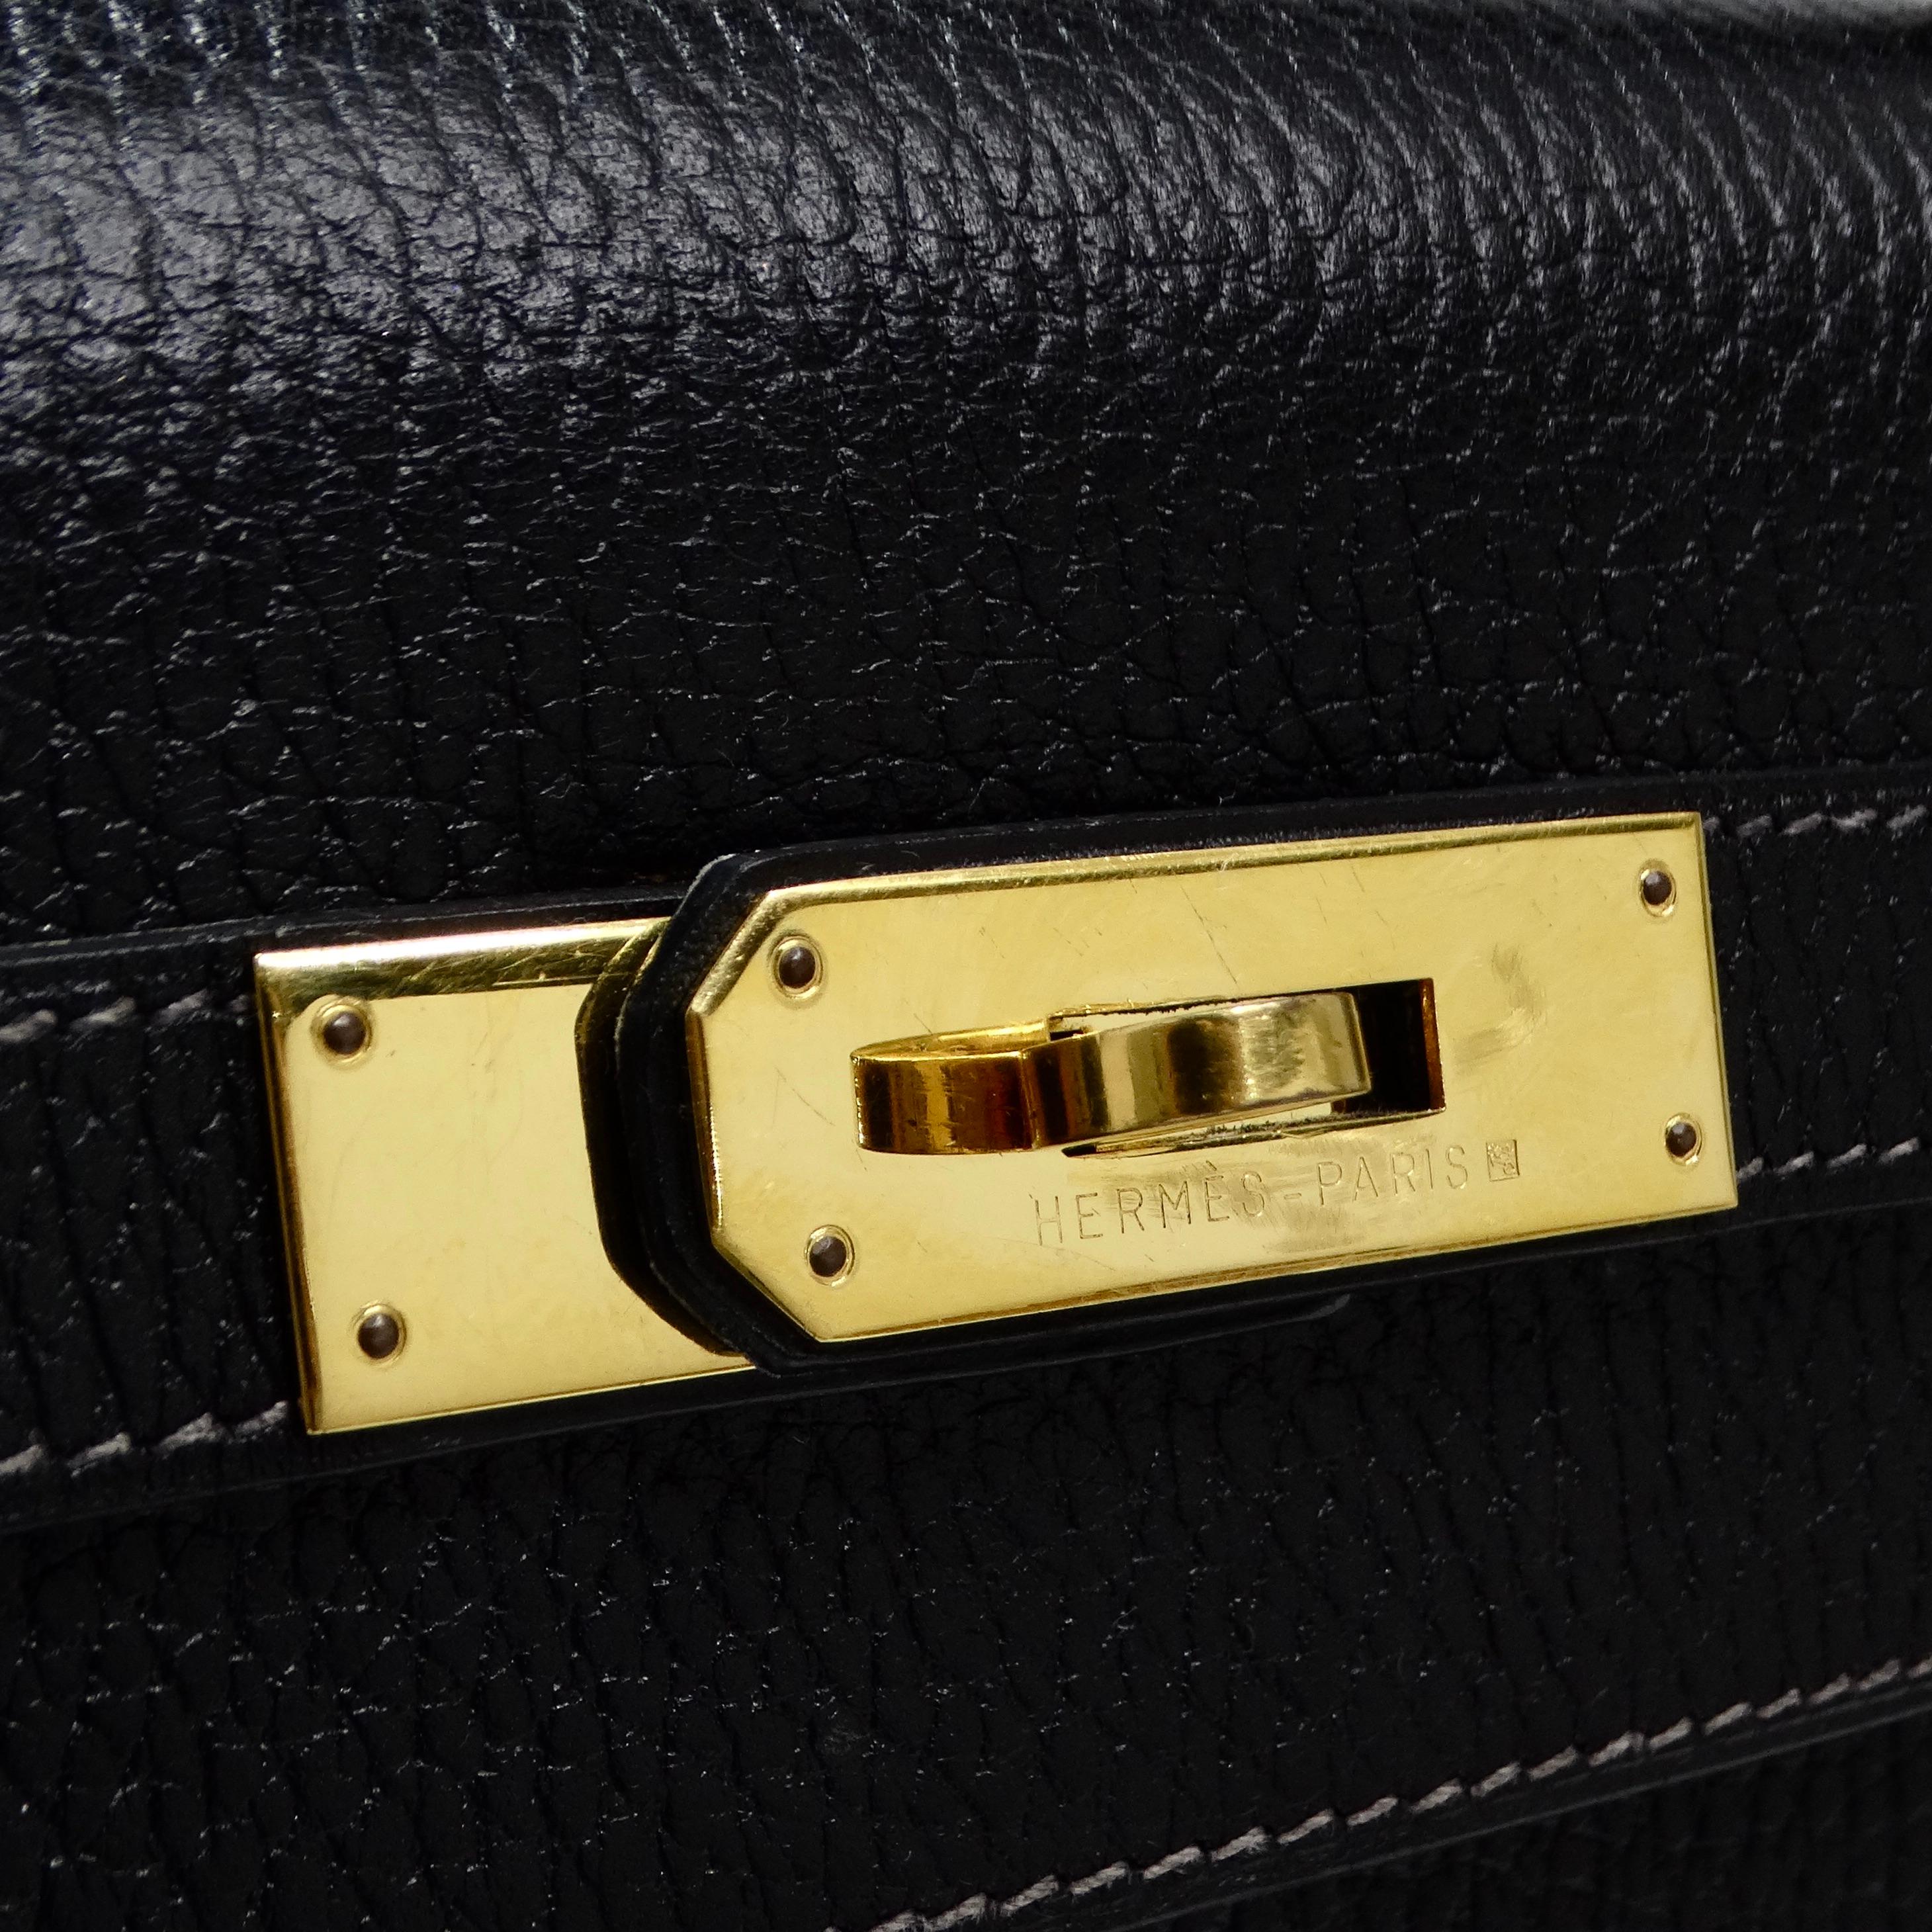 Introducing the timeless elegance of the Hermes Kelly 1993 Black Ardennes Leather 32 cm handbag. Crafted from luxurious Ardennes leather in classic black and adorned with exquisite gold hardware, this iconic handbag is a vintage gem that exudes